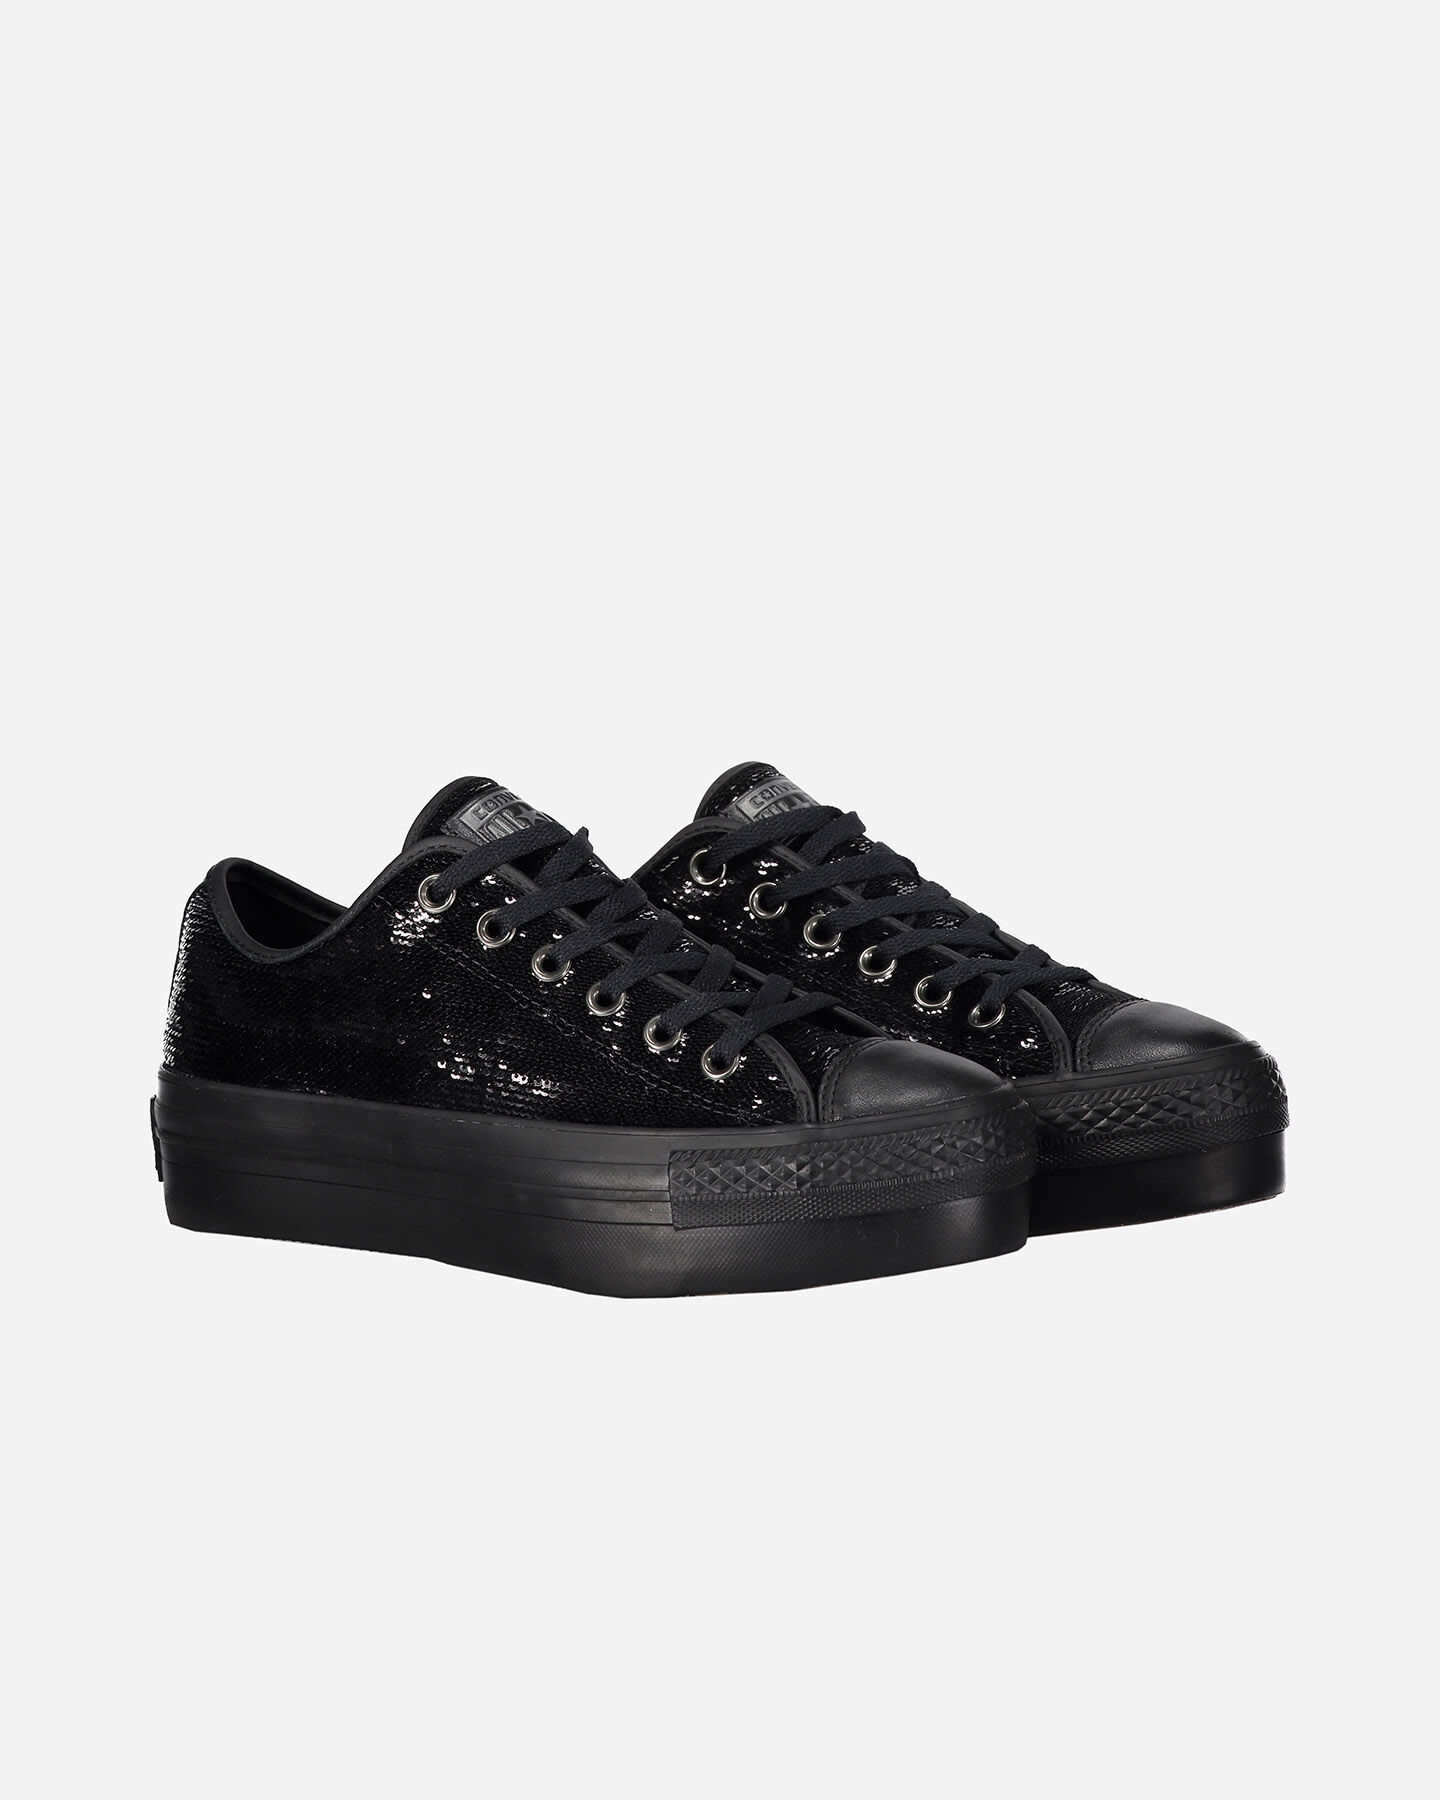 converse all star paillettes